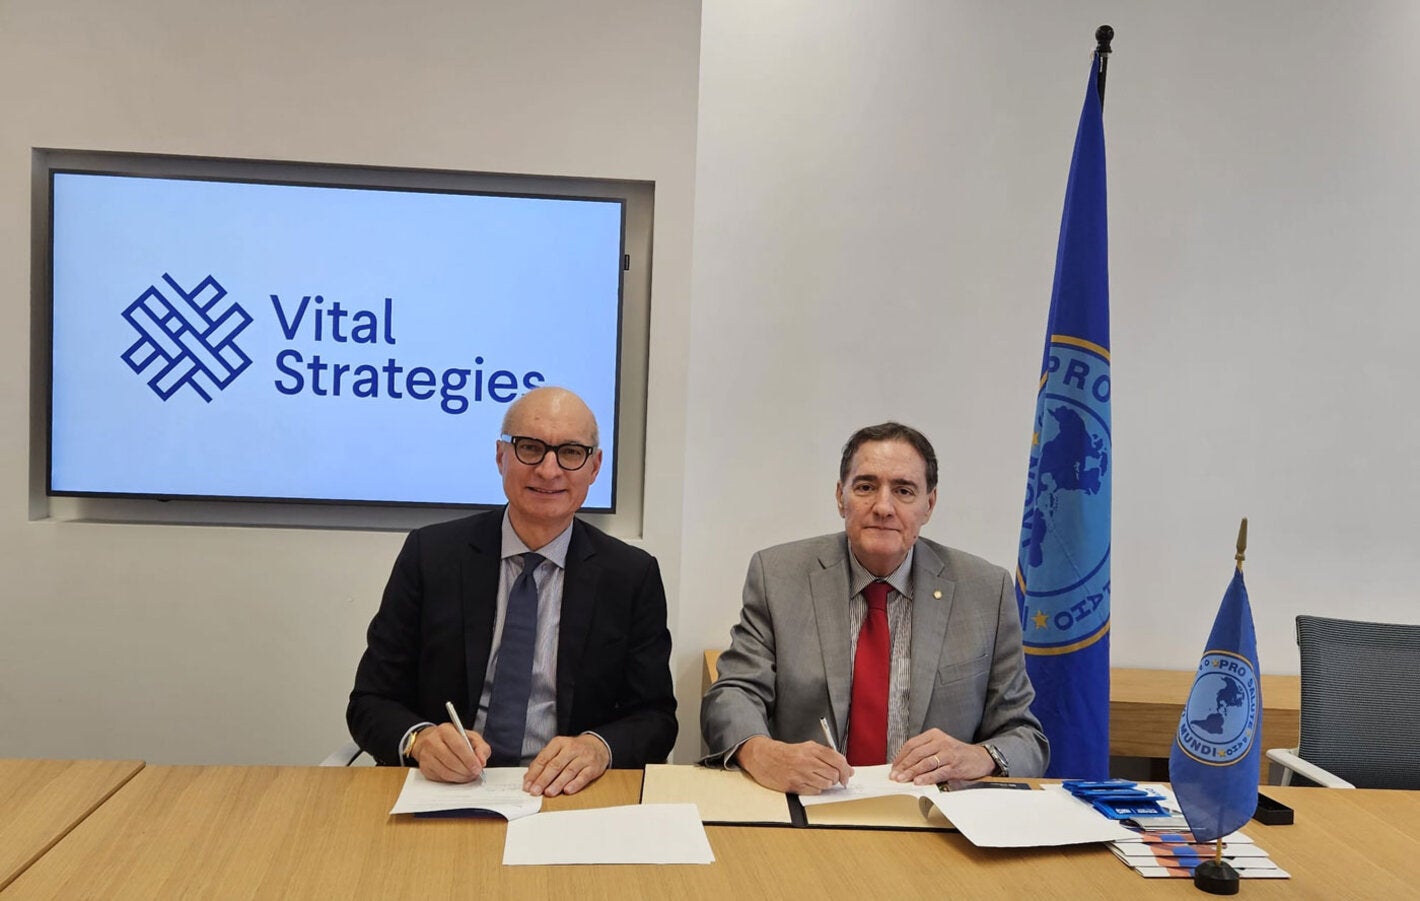 The Pan American Health Organization (PAHO) and Vital Strategies today signed a new partnership agreement to improve the use of data and evidence to address health challenges in the Americas.